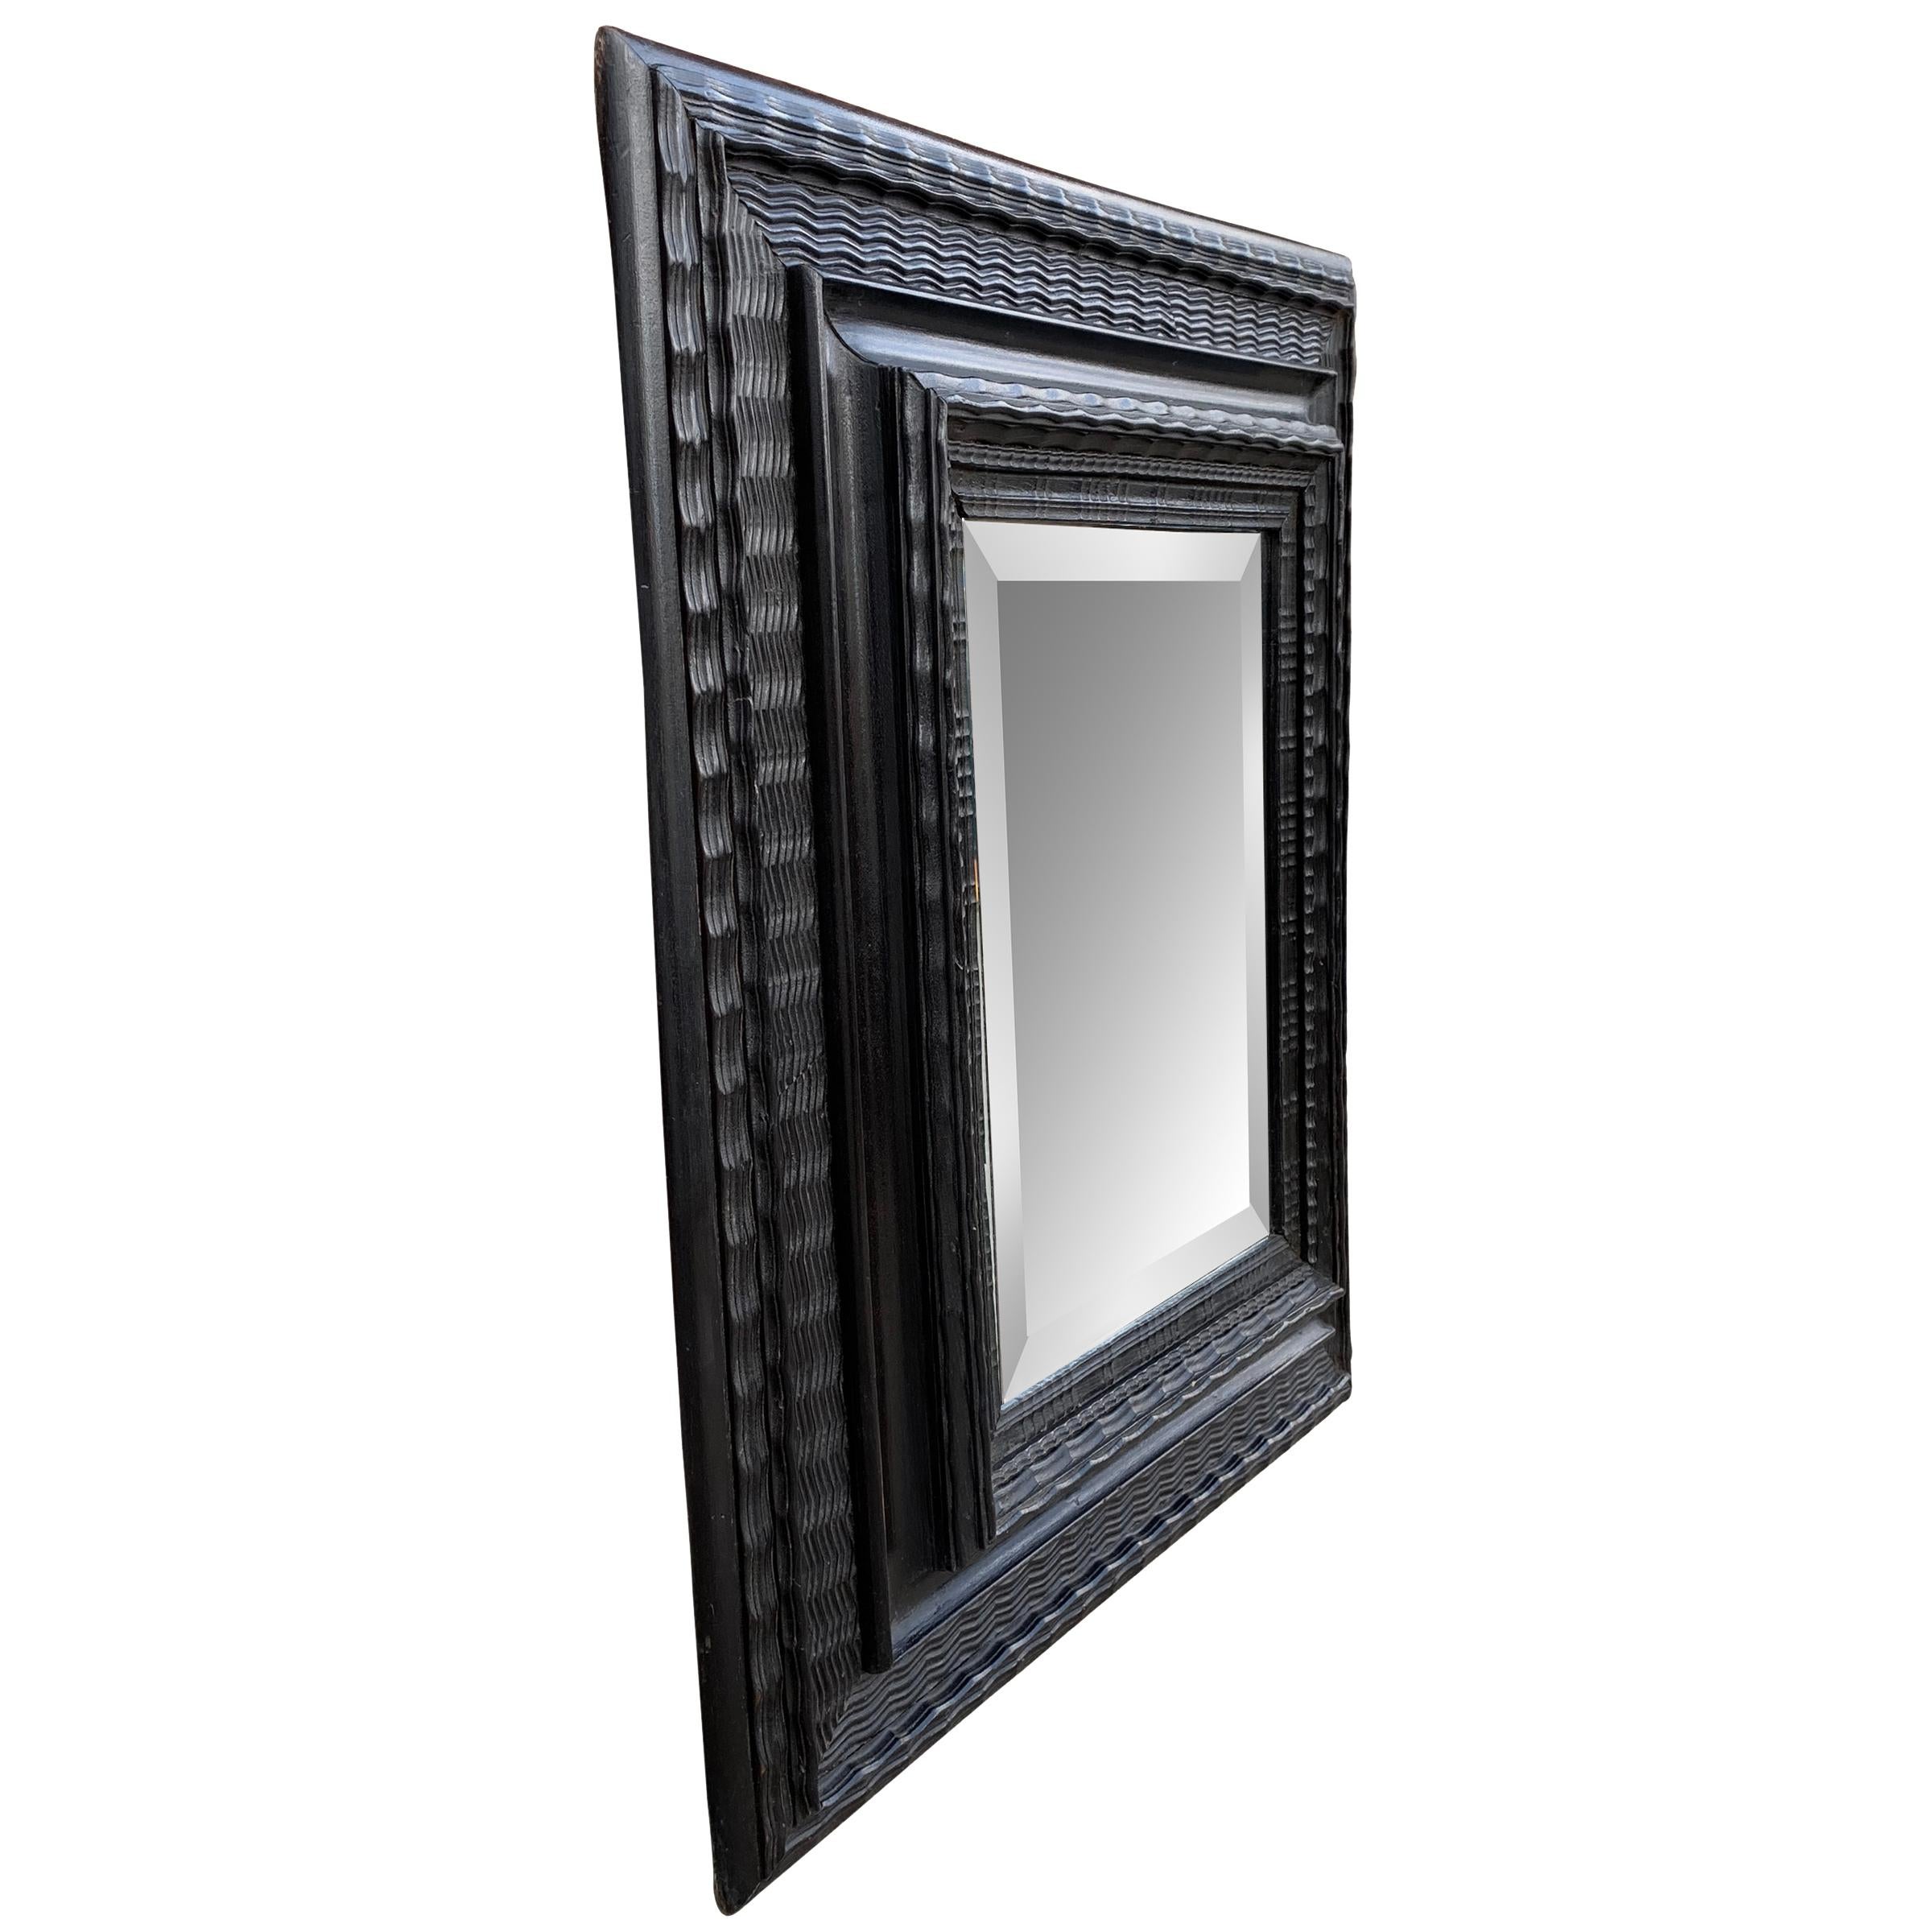 A beautiful 19th century Dutch ebonized frame with a wide profile containing multiple carved patterns framing a newer beveled glass mirror. An iron ring on the back can orient the frame vertically or horizontally.